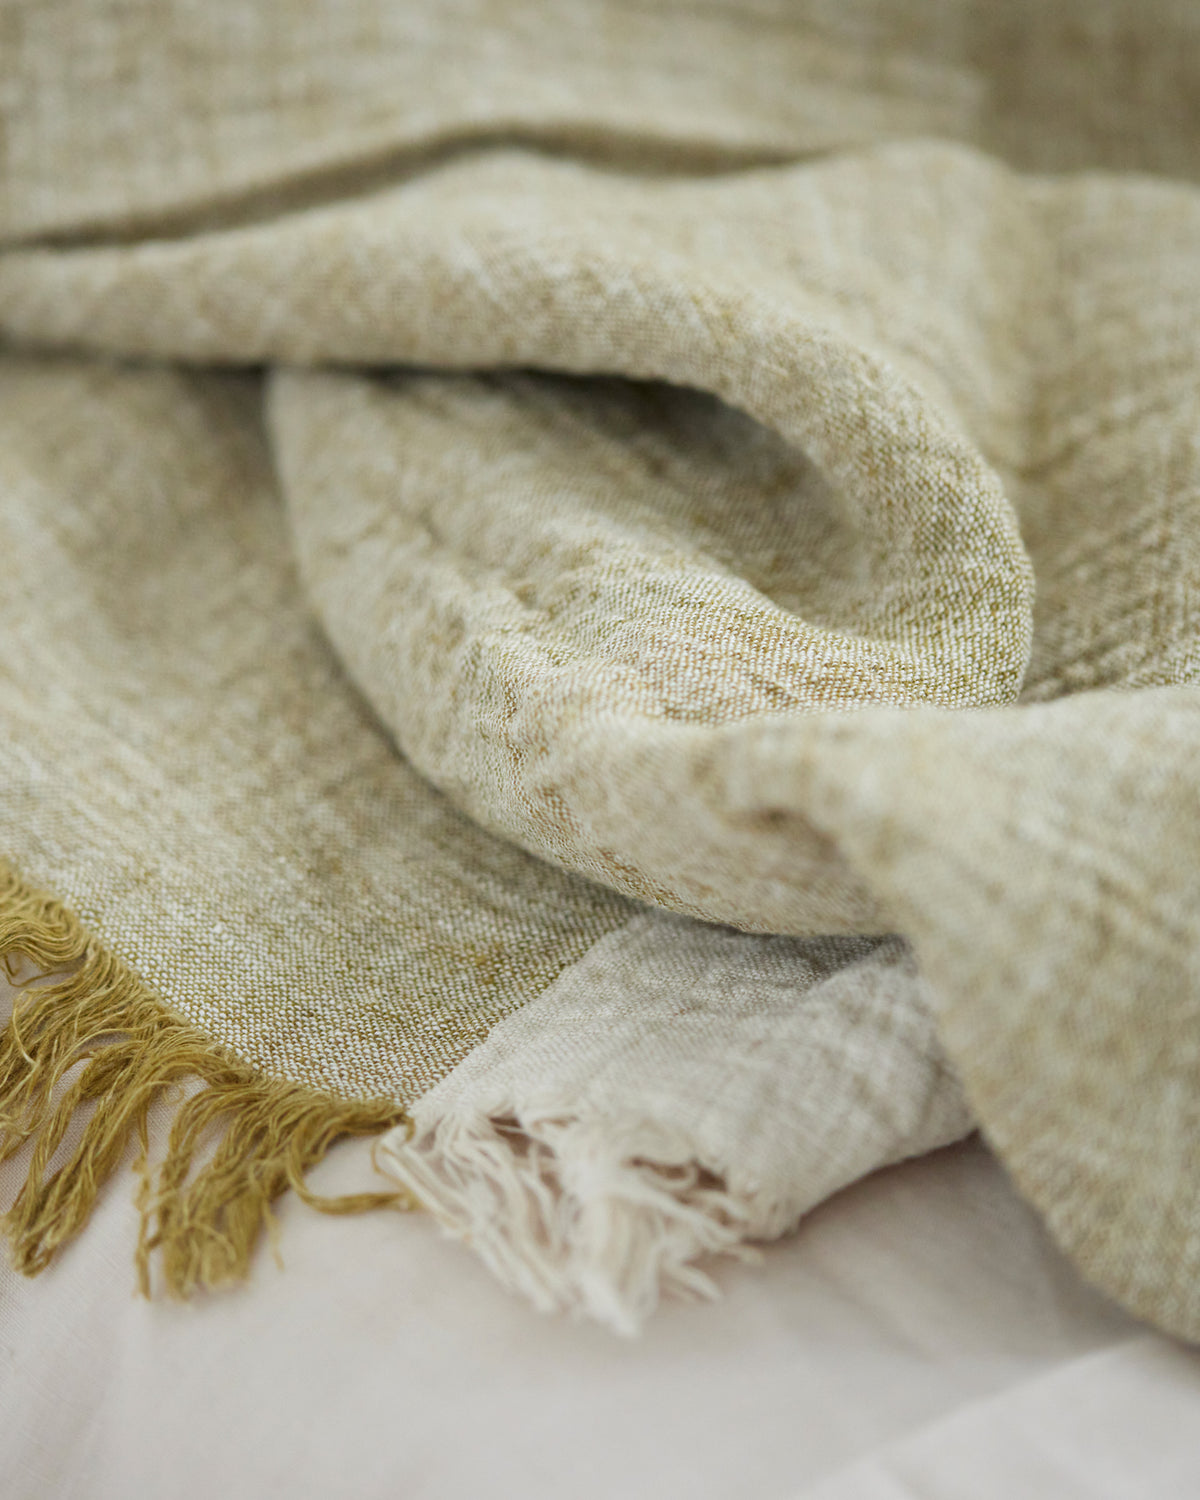 Discover a whole new layer of kid's bedroom styling with these extra soft textured Avenue Block Throws.   One of the most versatile items to layer on kids' beds to offer you a finished look. Sumptuously made in a 100% pure linen double weave, generously sized and finished with a fringed hem detail.  